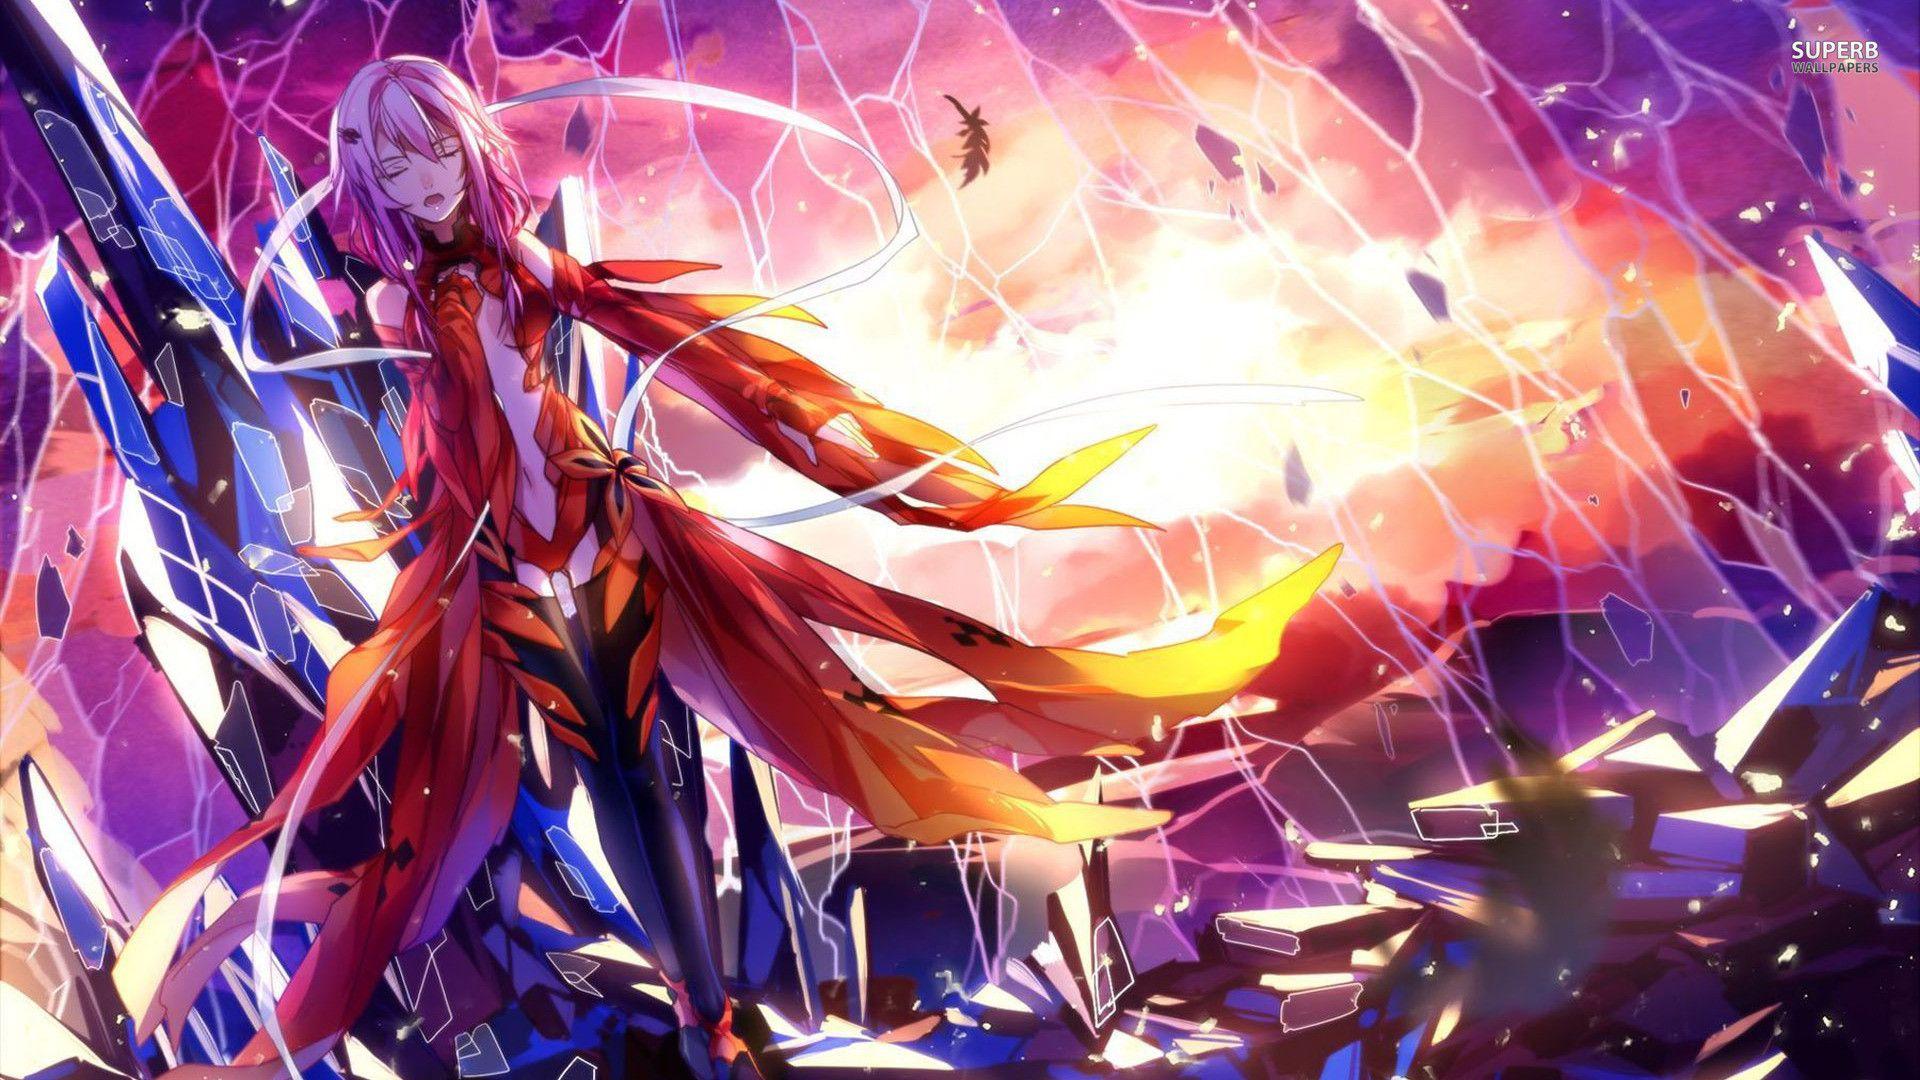 Wallpaper Anime, Present, Guilty Crown - Lost Christmas Girl for mobile and  desktop, section прочее, resolution 1920x1080 - download